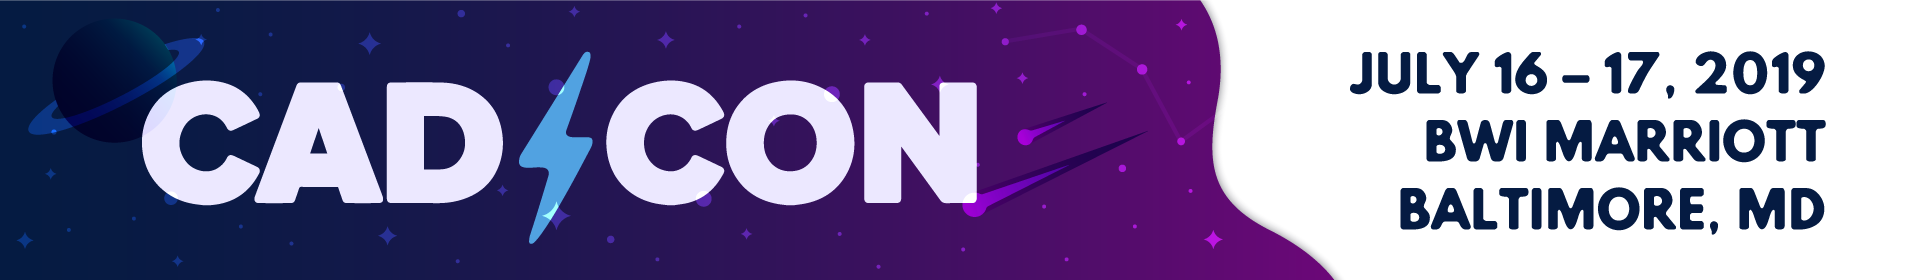 CadCon 2019 Event Banner